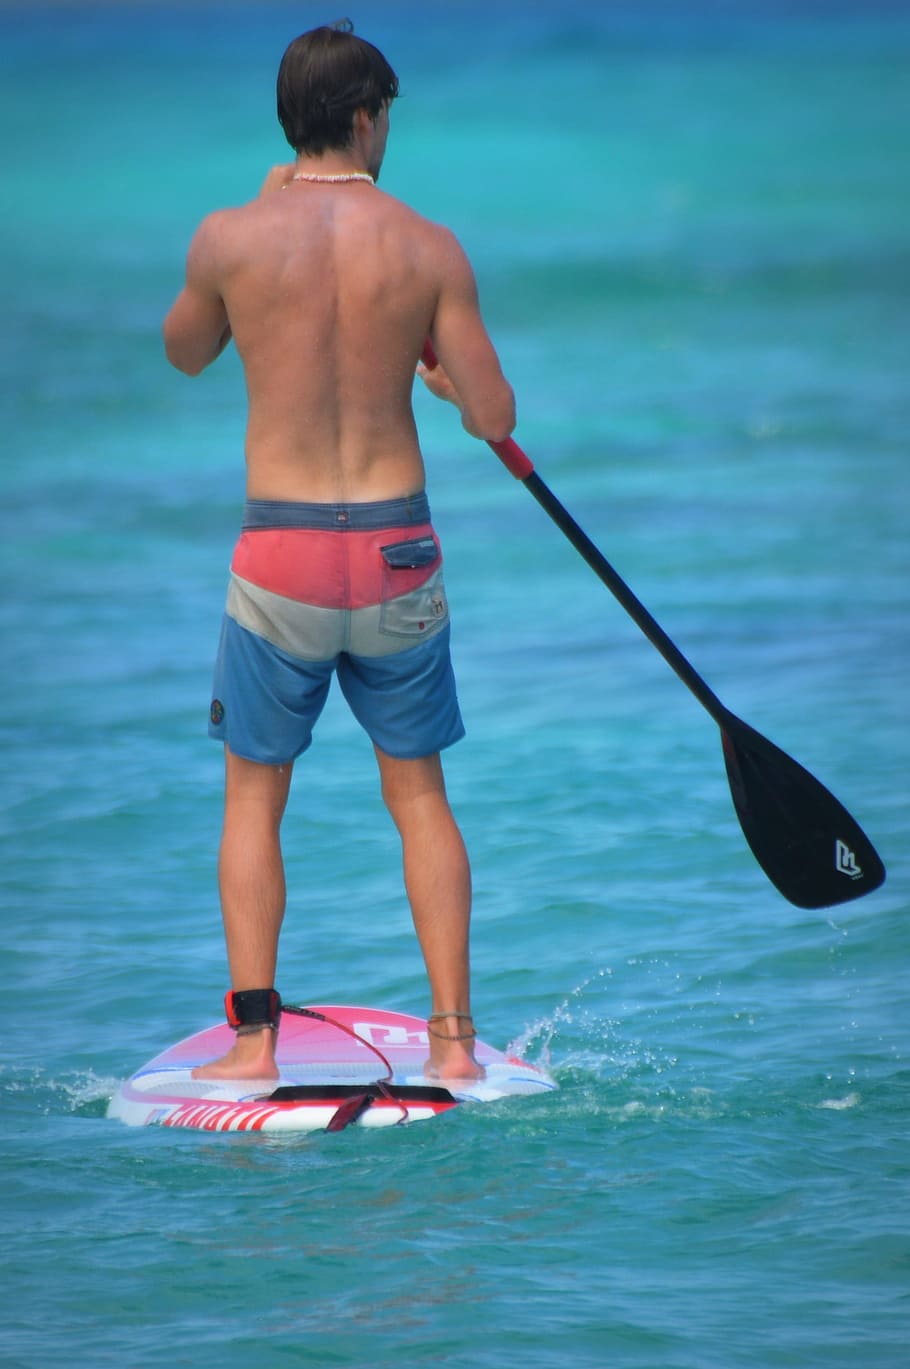 Man, People, Paddle, Sea, Swim Shorts, man, people, surfboard, shirtless, rear view, one person